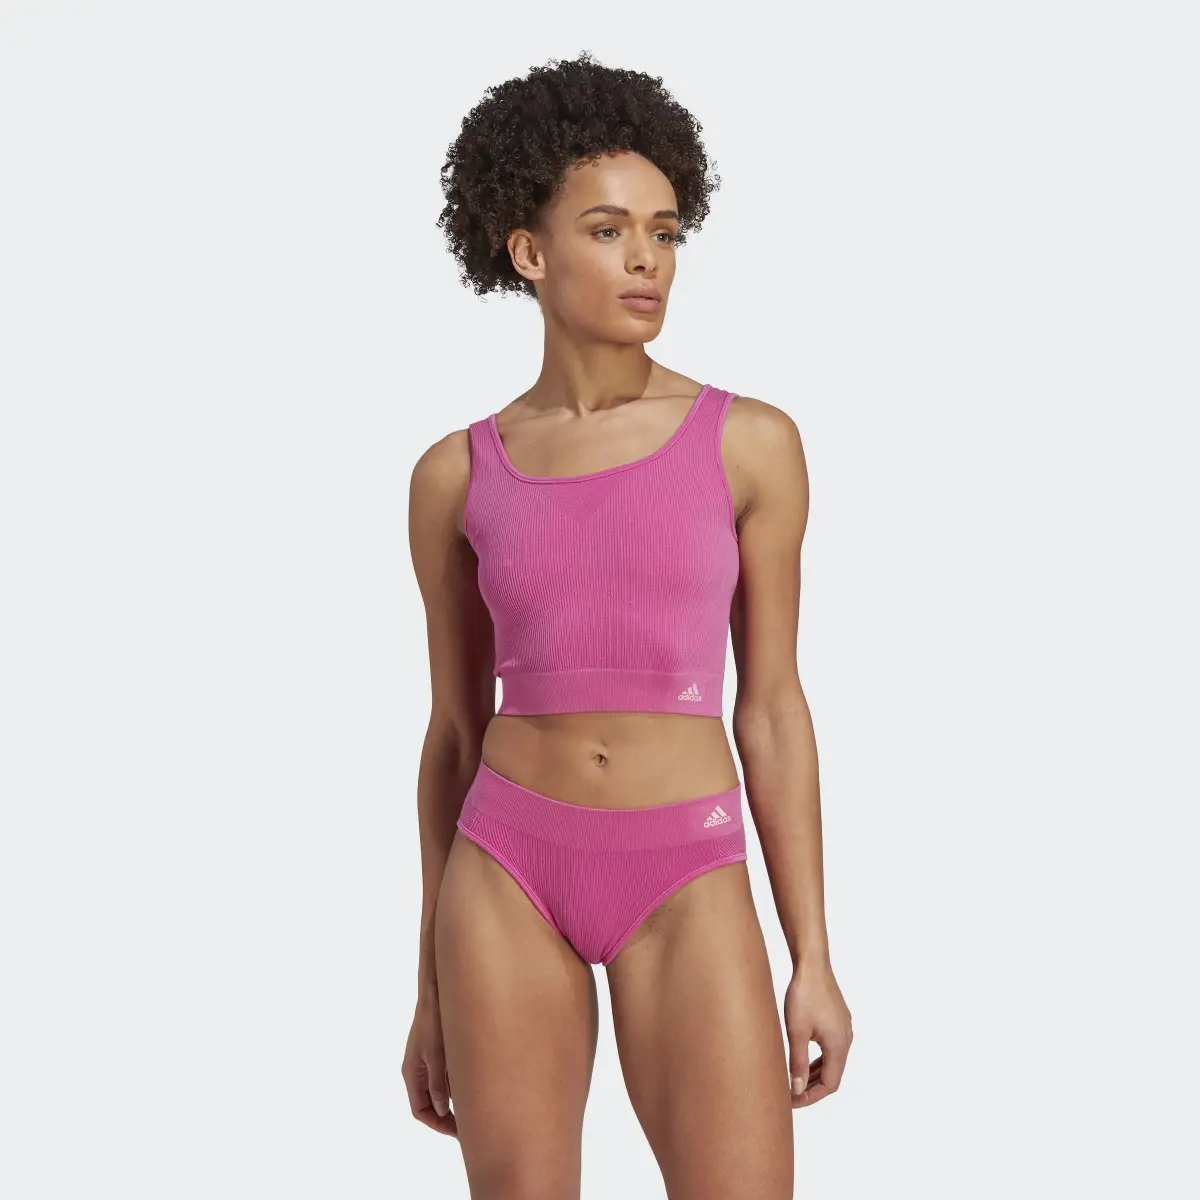 Adidas Ribbed Active Seamless Cropped Tank Top Underwear. 2